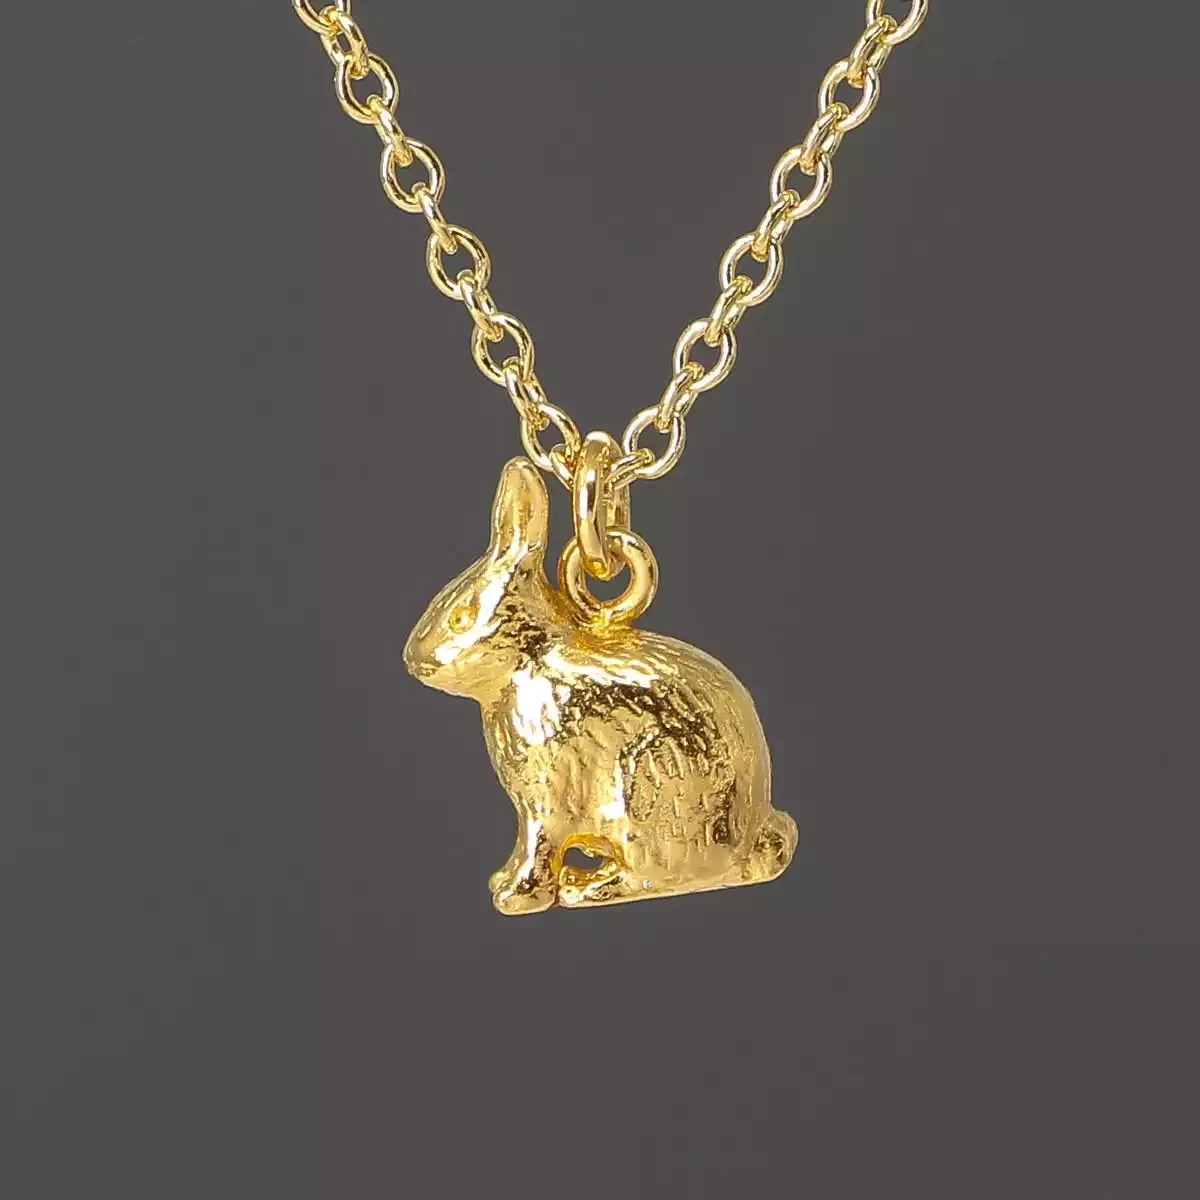 Sitting Bunny Necklace - Gold Plated by Alex Monroe